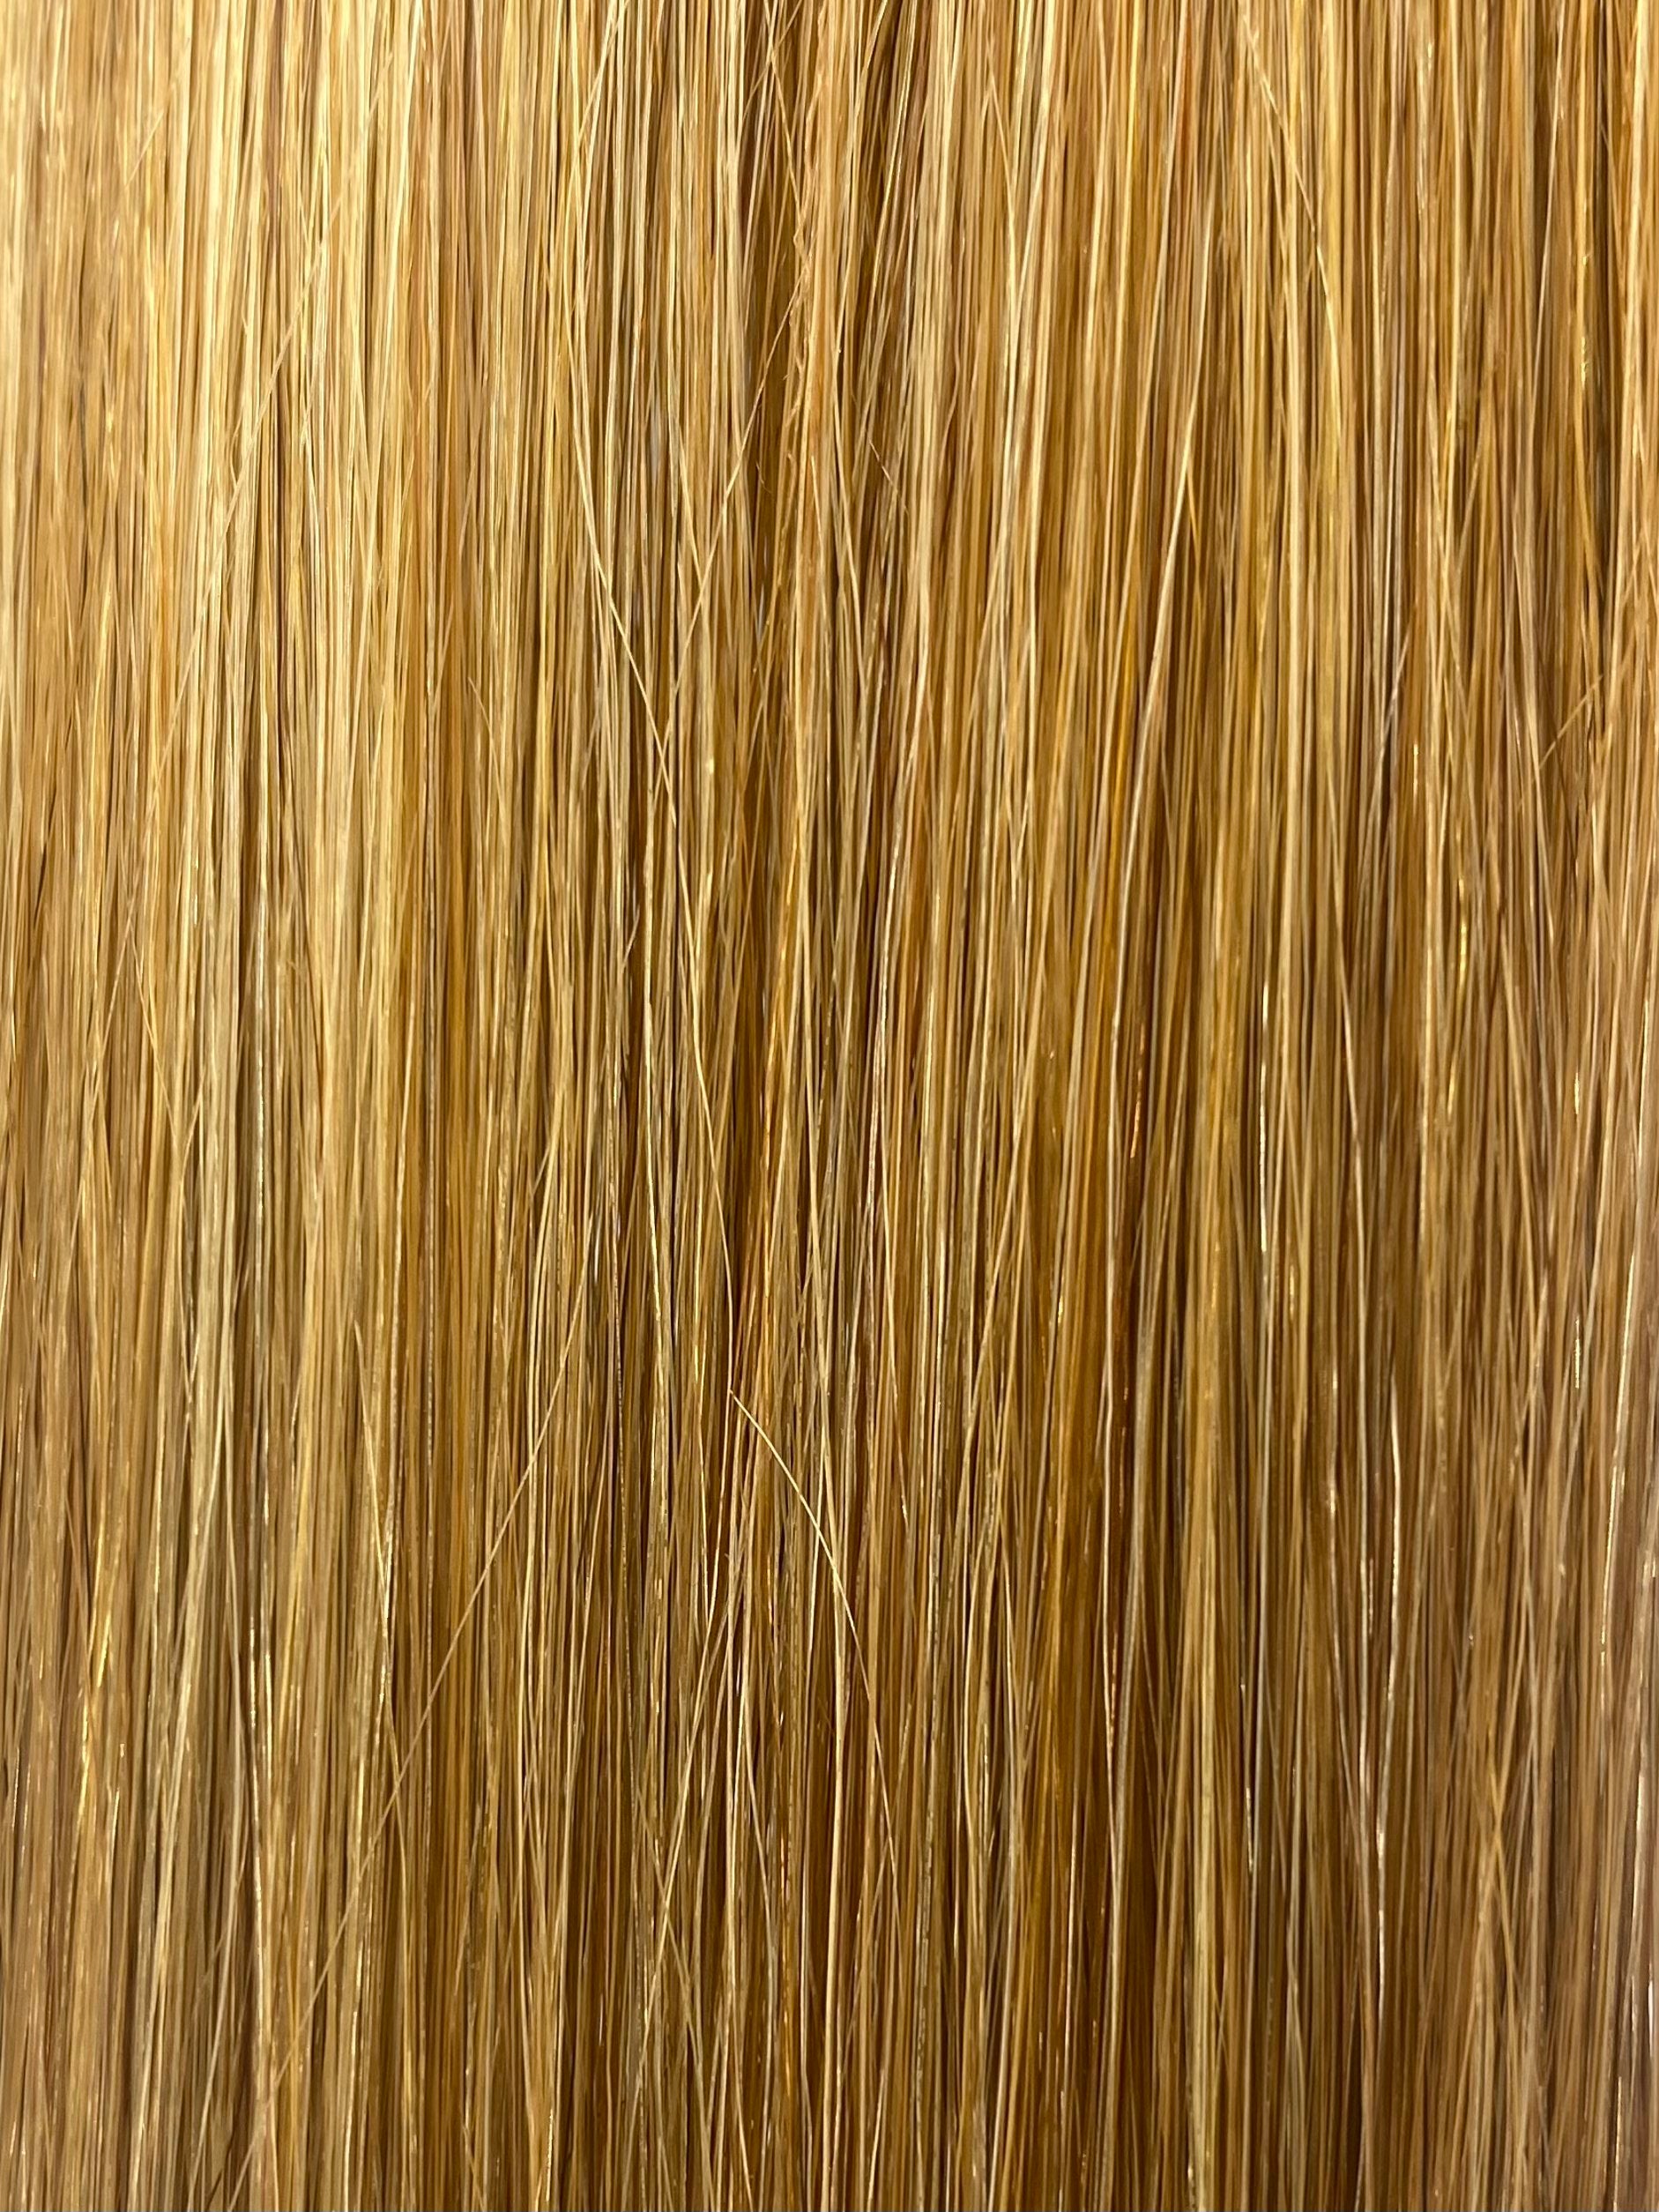 FUSION HIGHLIGHT #27/140 GOLDEN BLONDE/GOLDEN ULTRA BLONDE 50CM/ 20 INCHES  -  20 GRAMS - Image 1